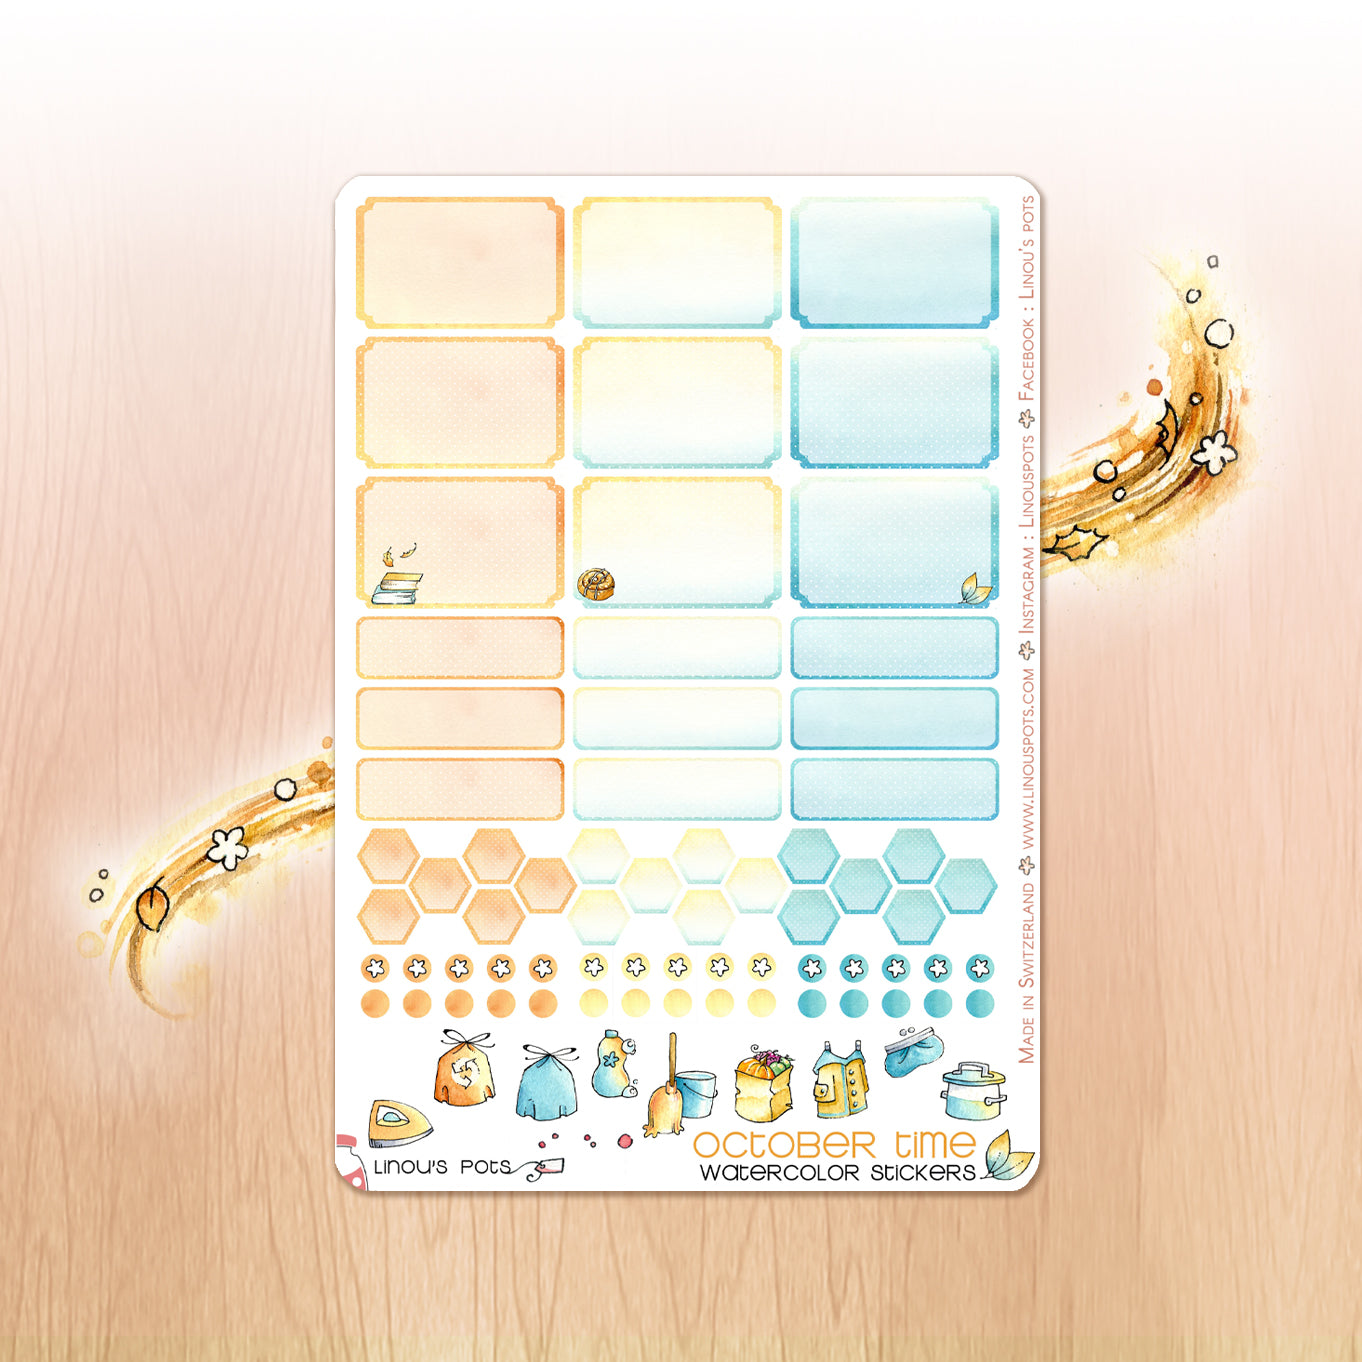 Half and quarter boxes stickers for vertical planner